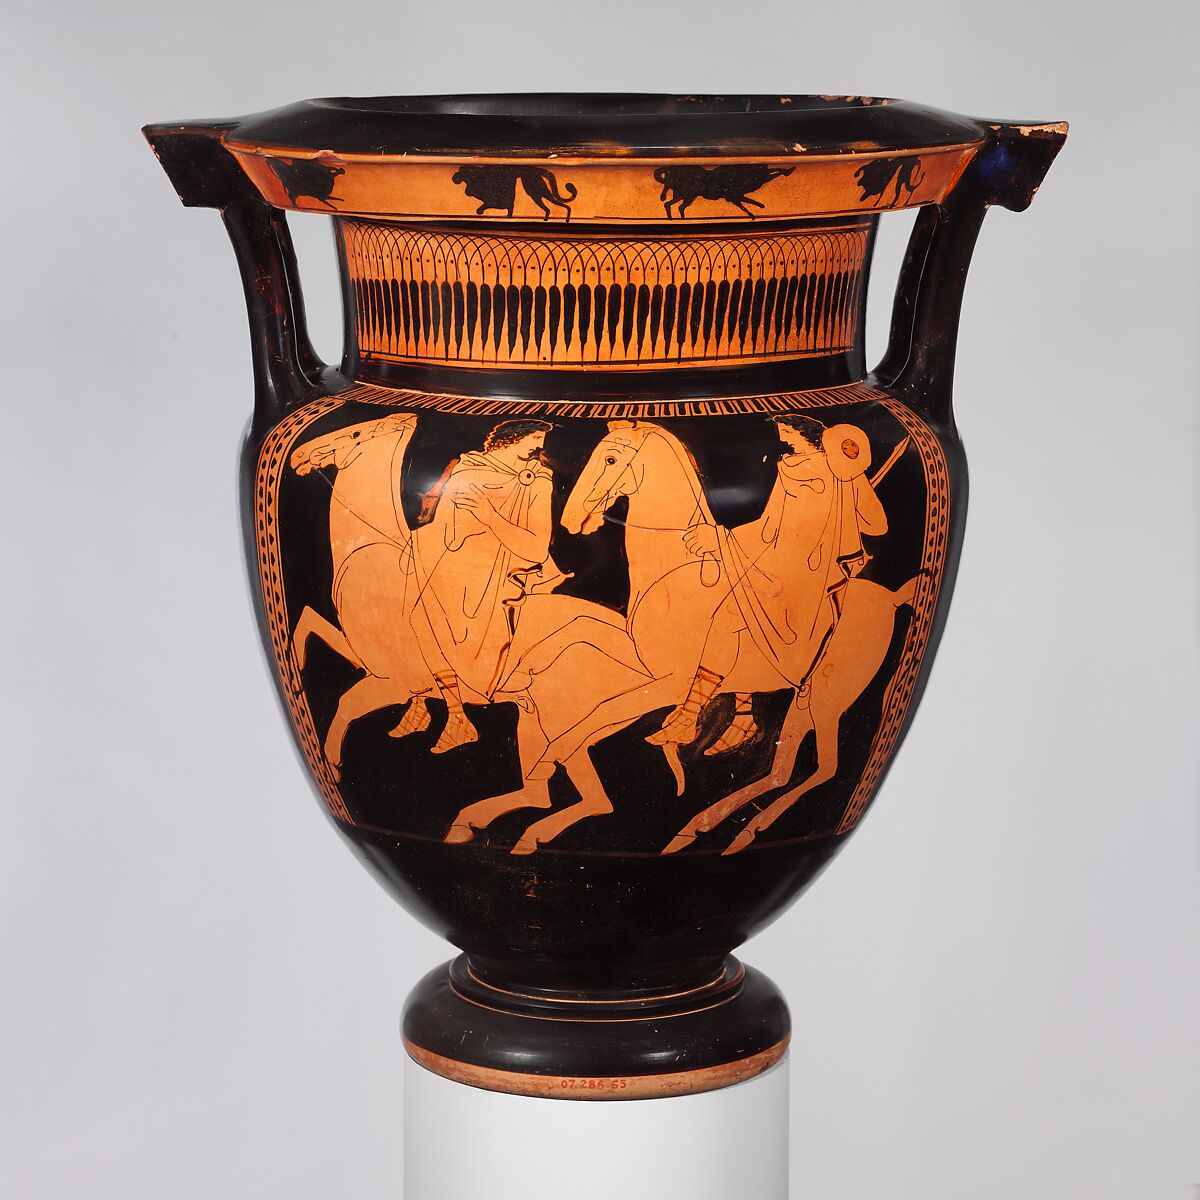 Terracotta column-krater (bowl for mixing wine and water), Attributed to the Marlay Painter, Terracotta, Greek, Attic 